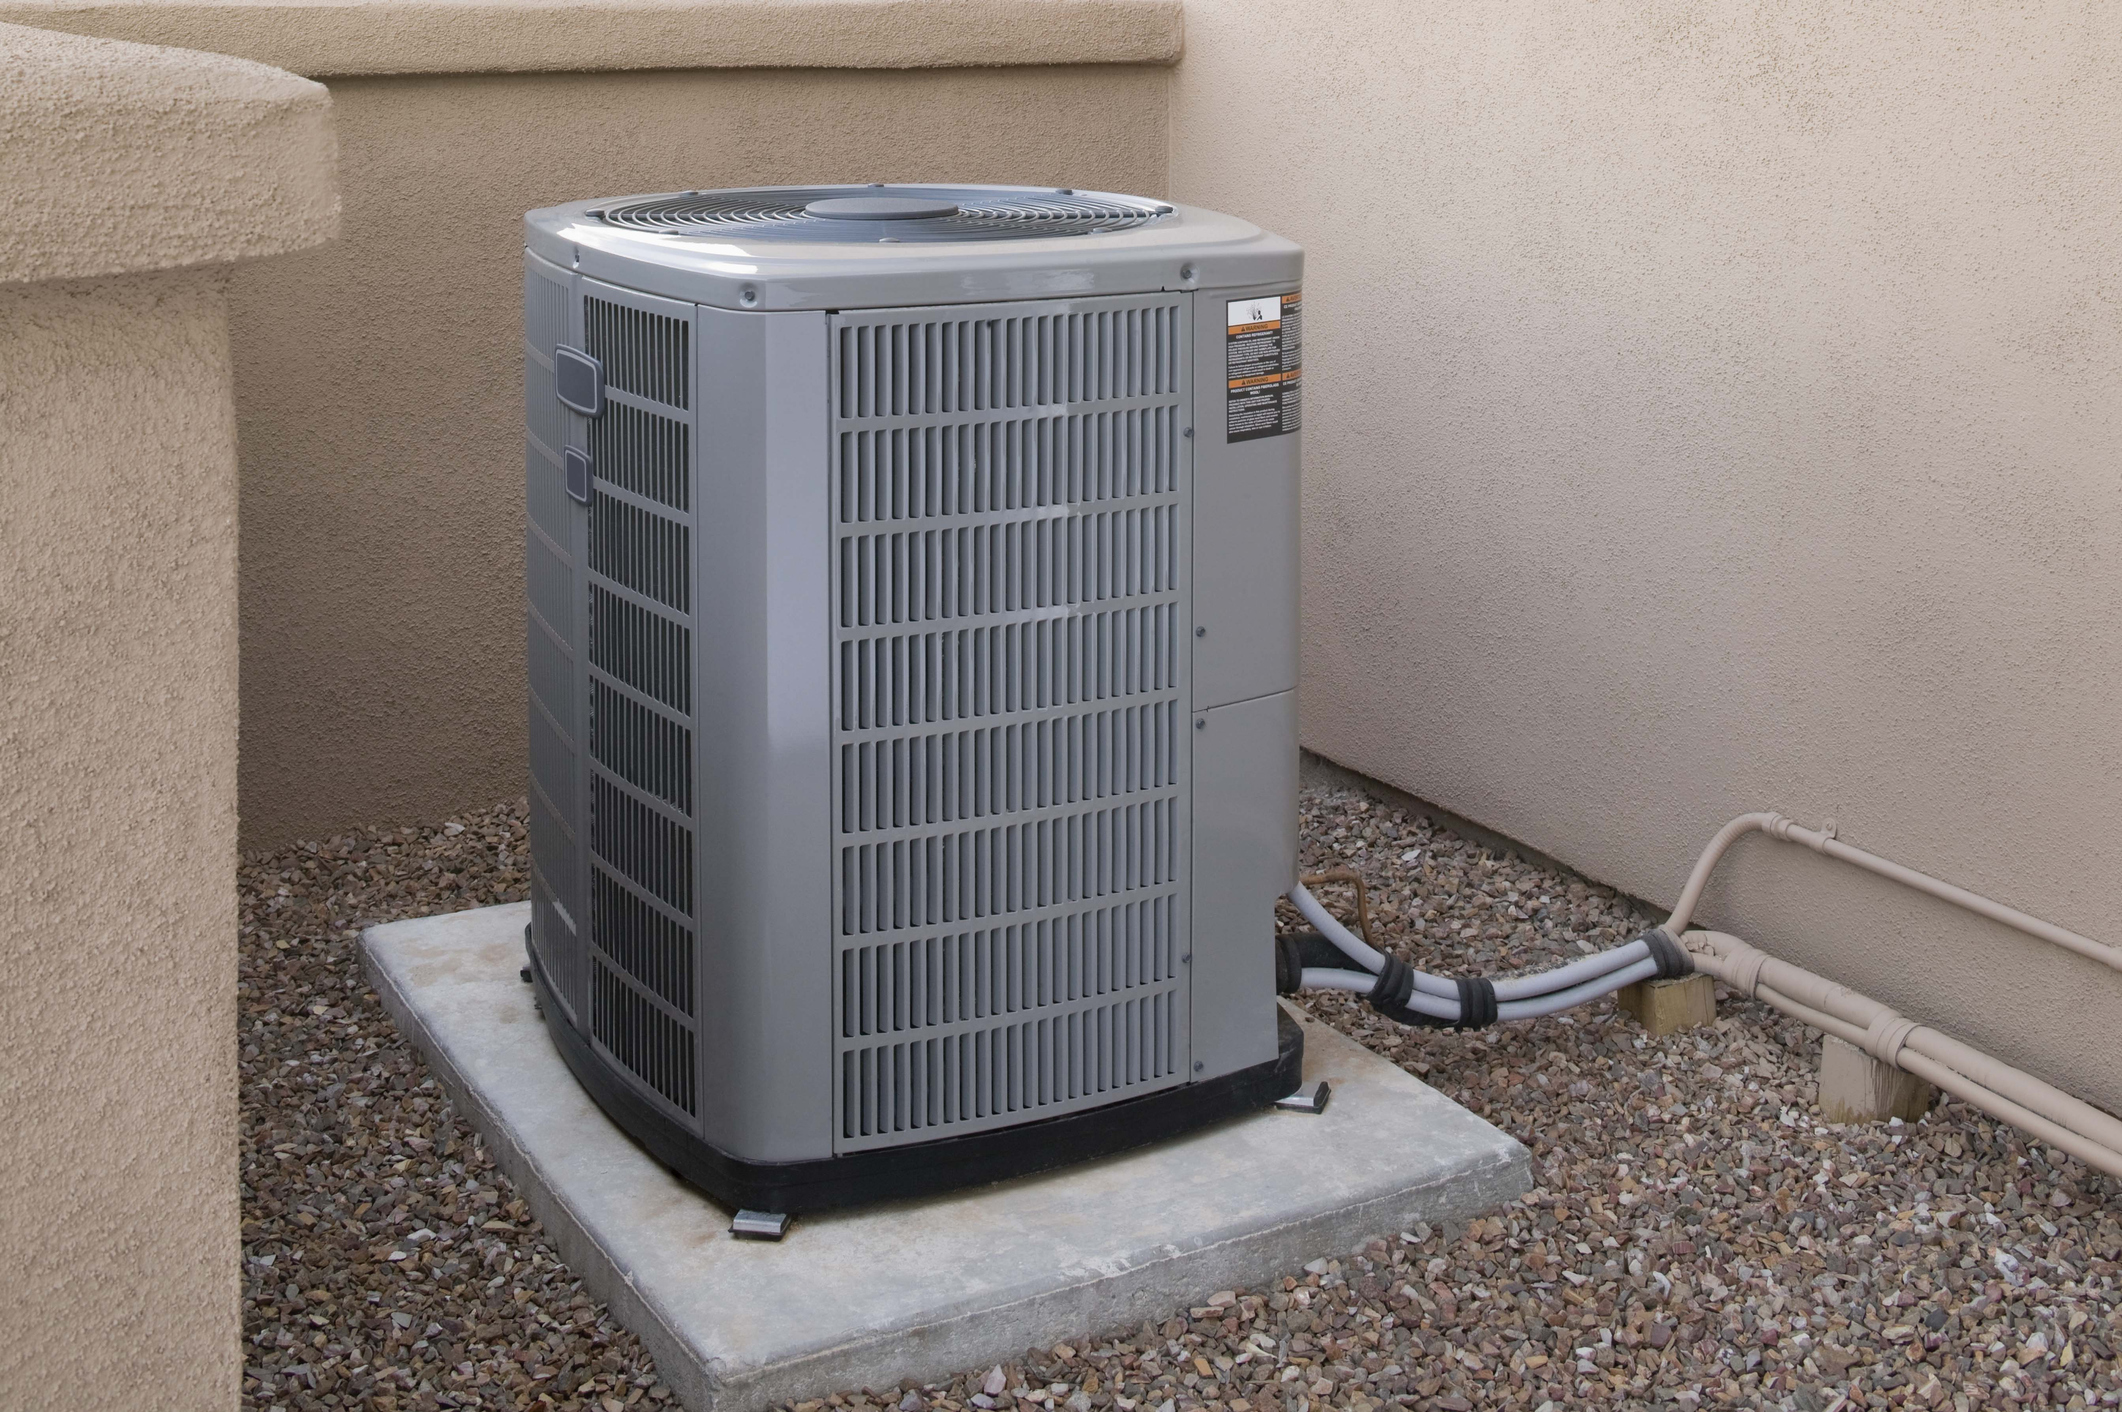 How Often Does an Air Conditioner Need Service?